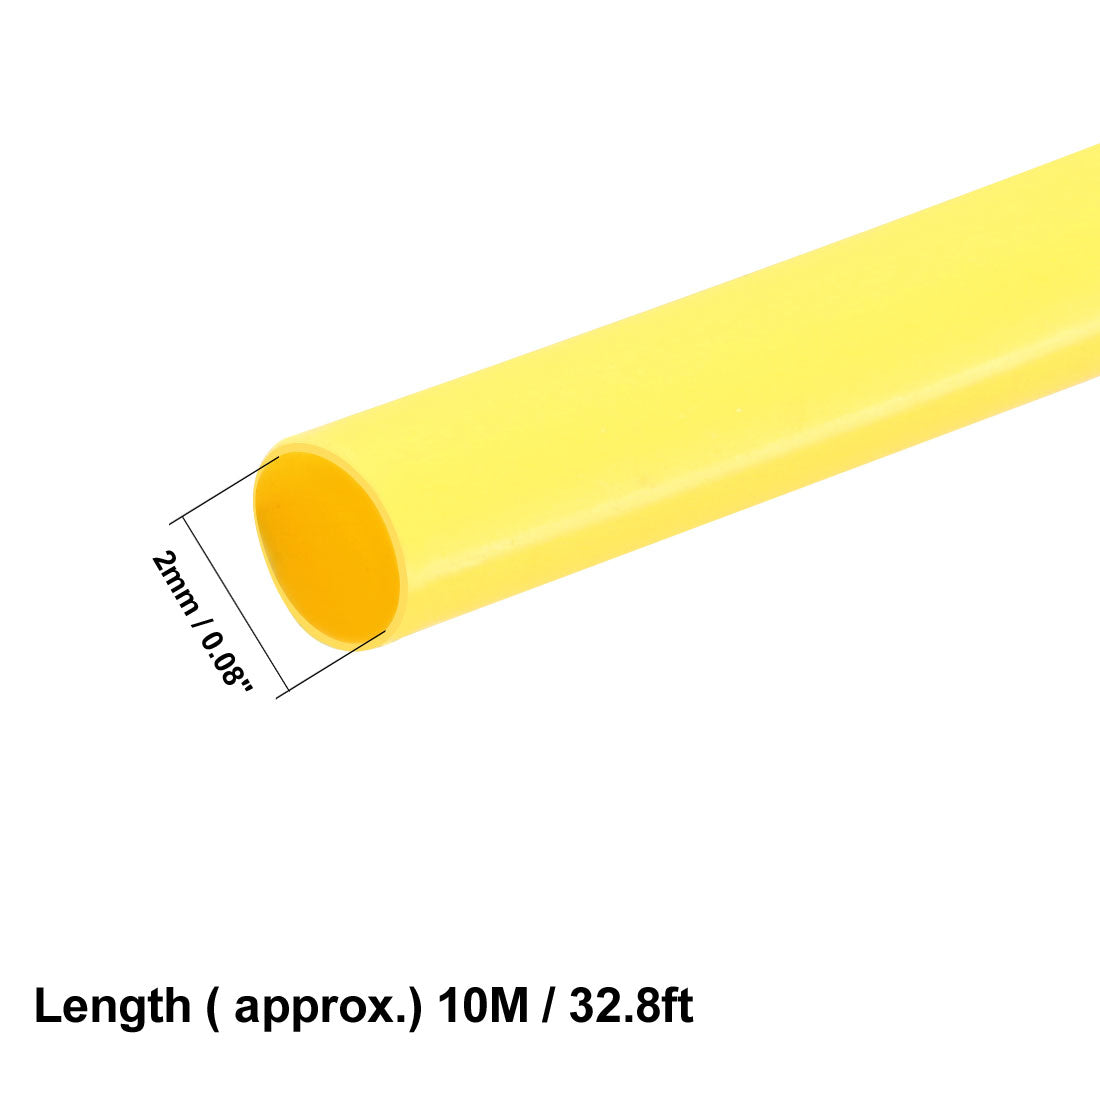 uxcell Uxcell Heat Shrink Tube 2:1 Electrical Insulation Tube Wire Cable Tubing Sleeving Wrap Yellow 2mm Diameter 1m Long